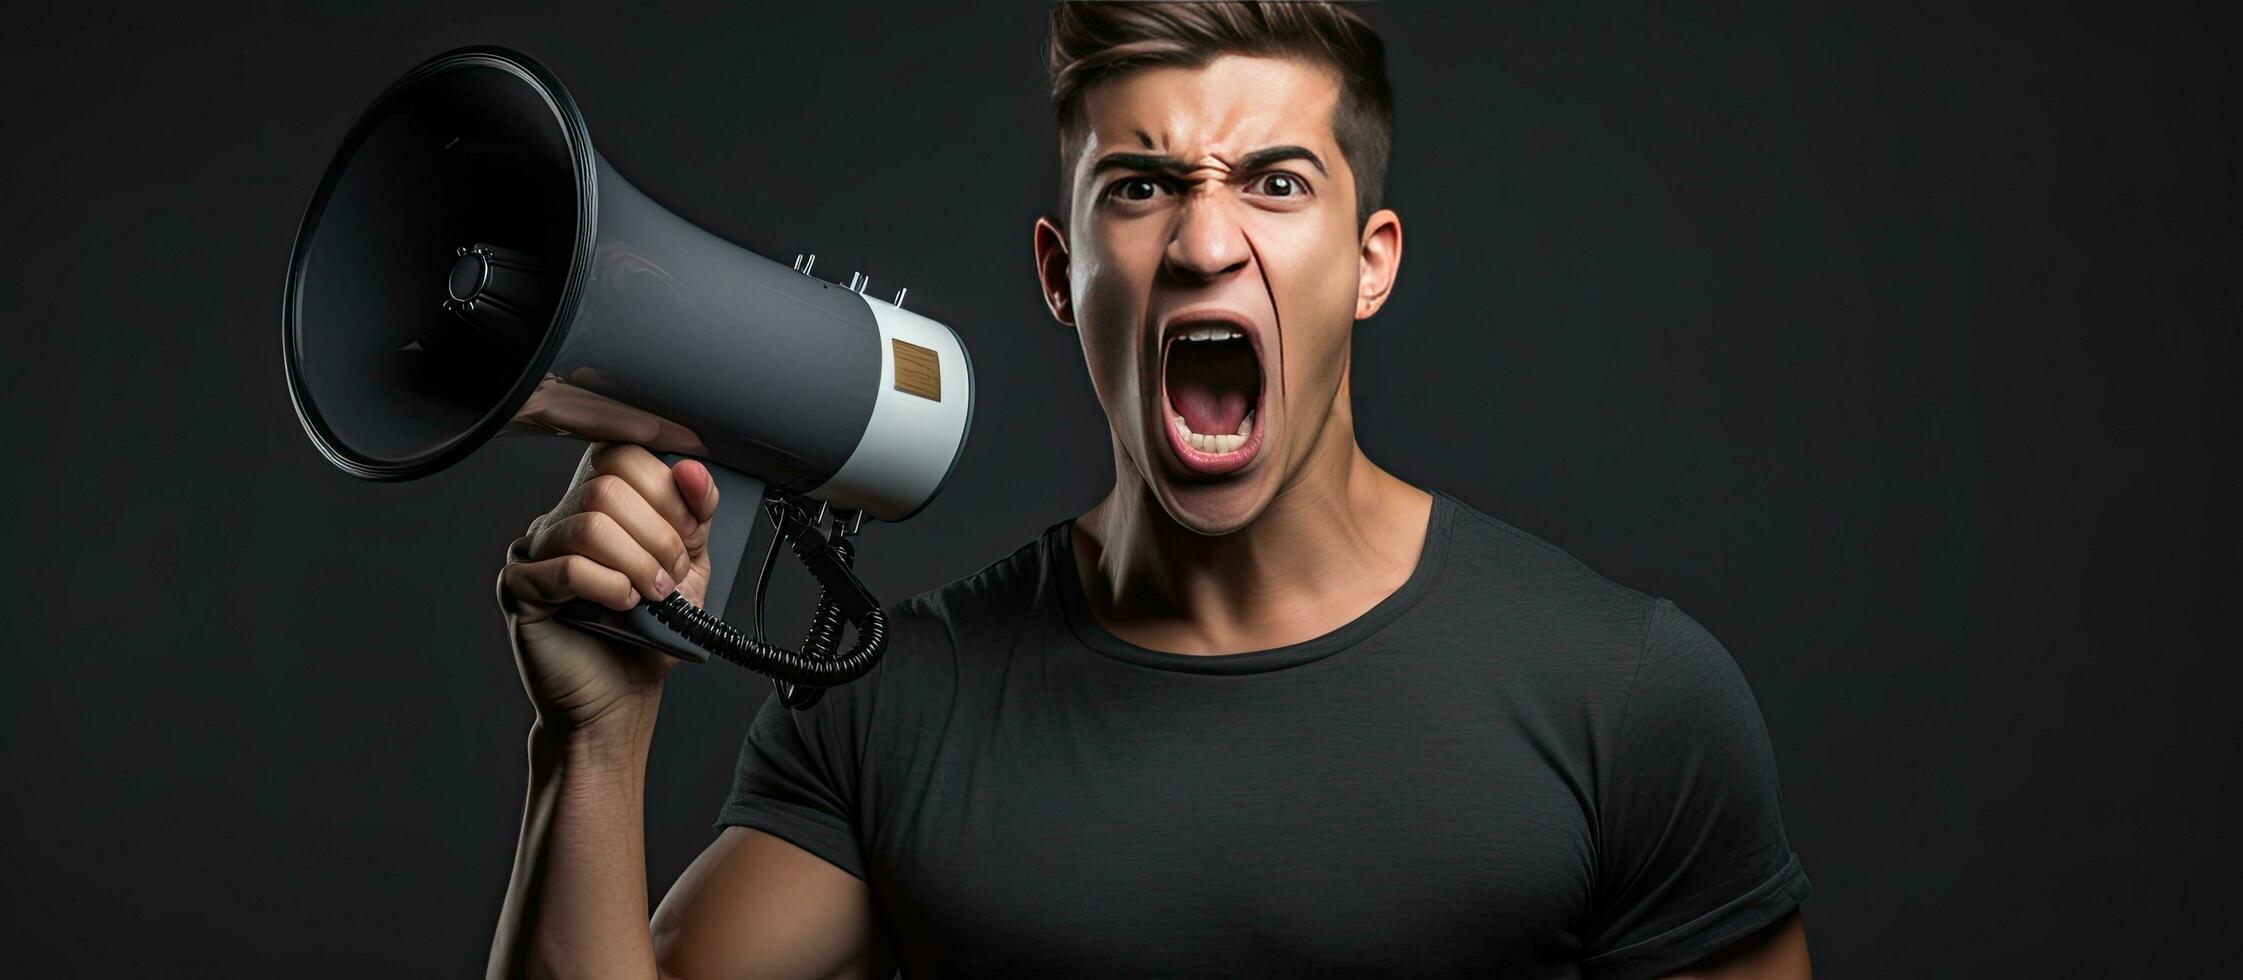 Handsome young man wins the day with a megaphone photo